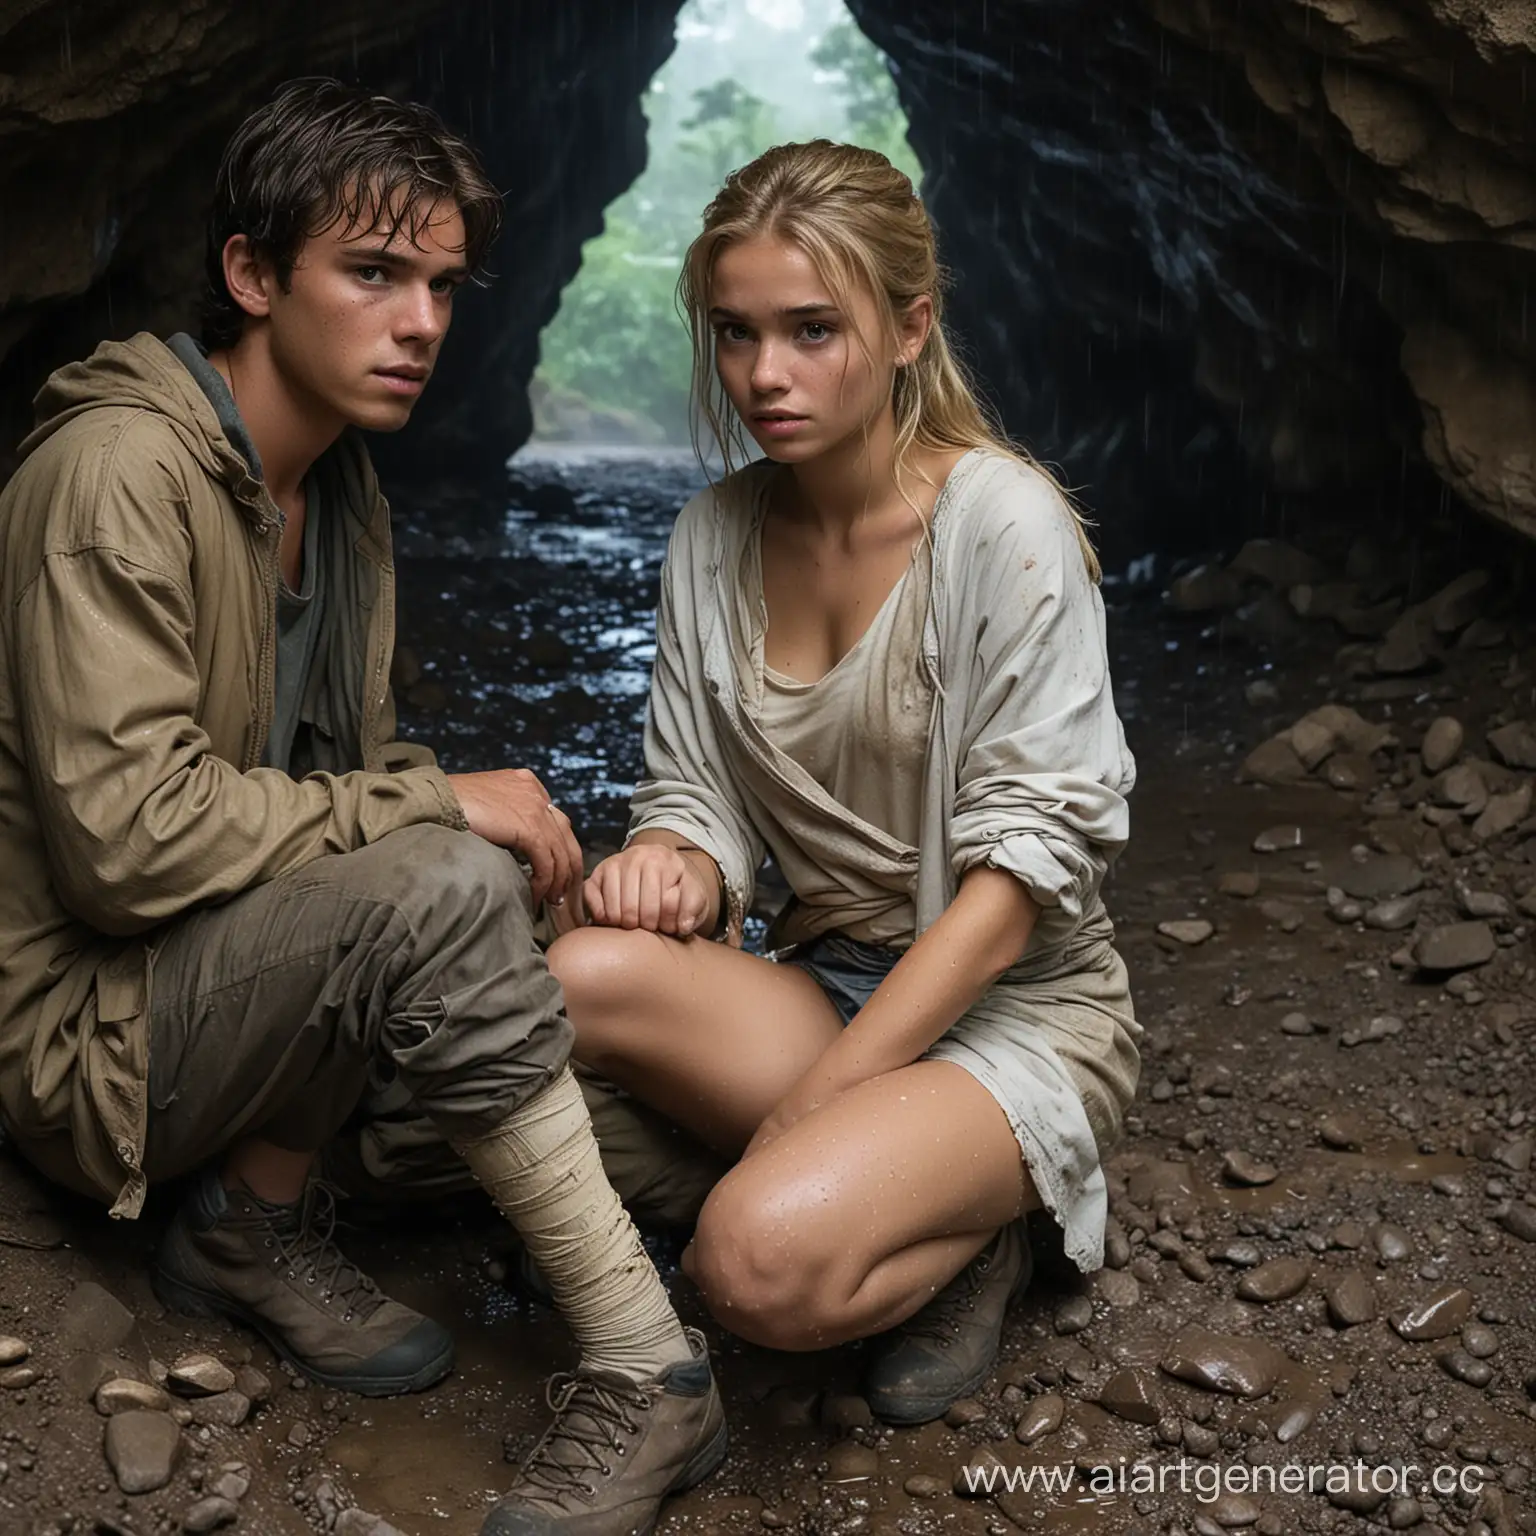 Landon wraps a bandage around Sofia's leg, in a small cave in the rain. 

Landon - a 19-year-old man, with a distinguished feel, despite being in ragged clothes with tan skin, short dark hair, and piercing eyes 

Sofia - a 14-year-old girl with an innocent face, dressed in ragged clothes. With long blonde hair